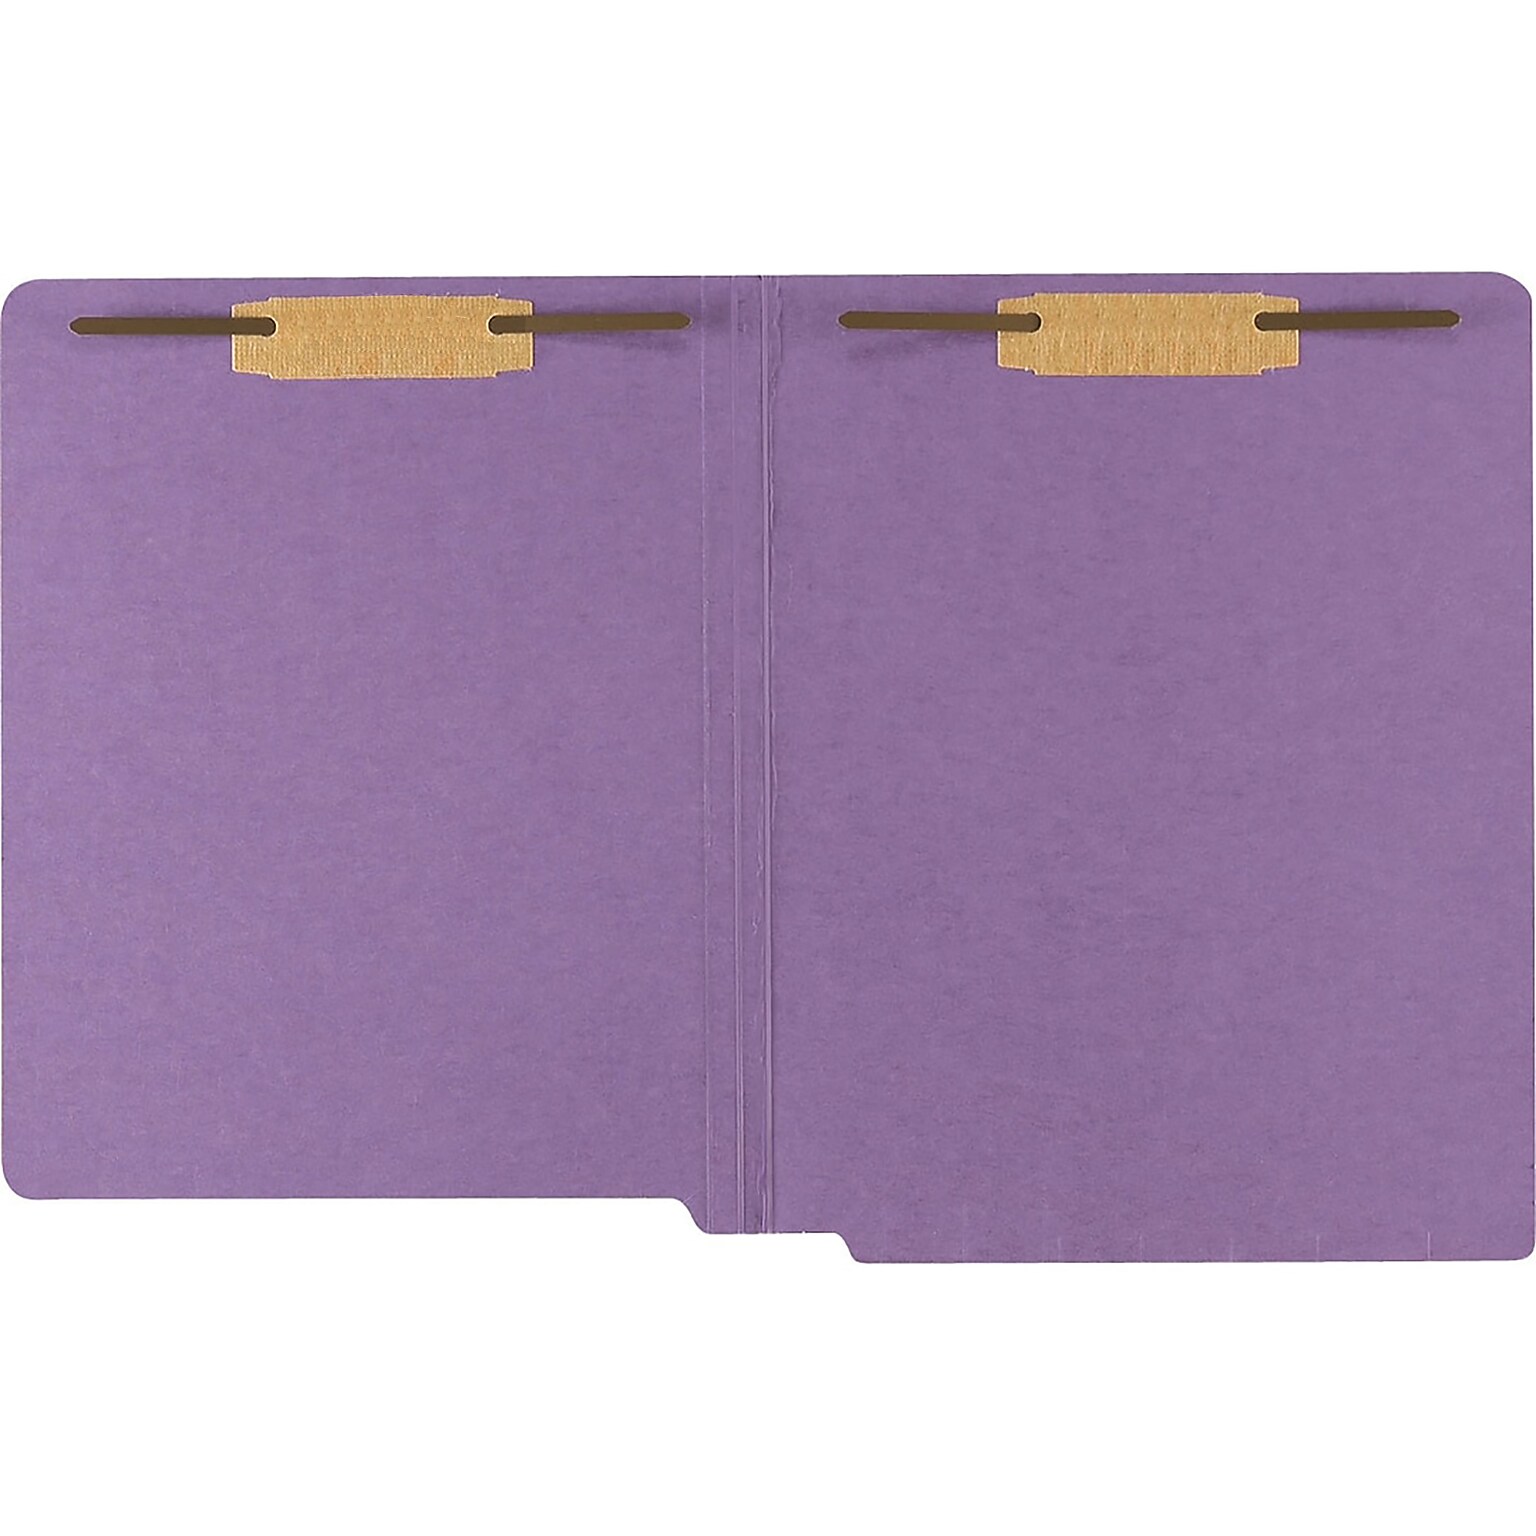 Medical Arts Press® Heavy-Duty Colored End-Tab Folders; 20 pt., 2 Fasteners, Straight Cut, Letter Size, 40/Box (50666)